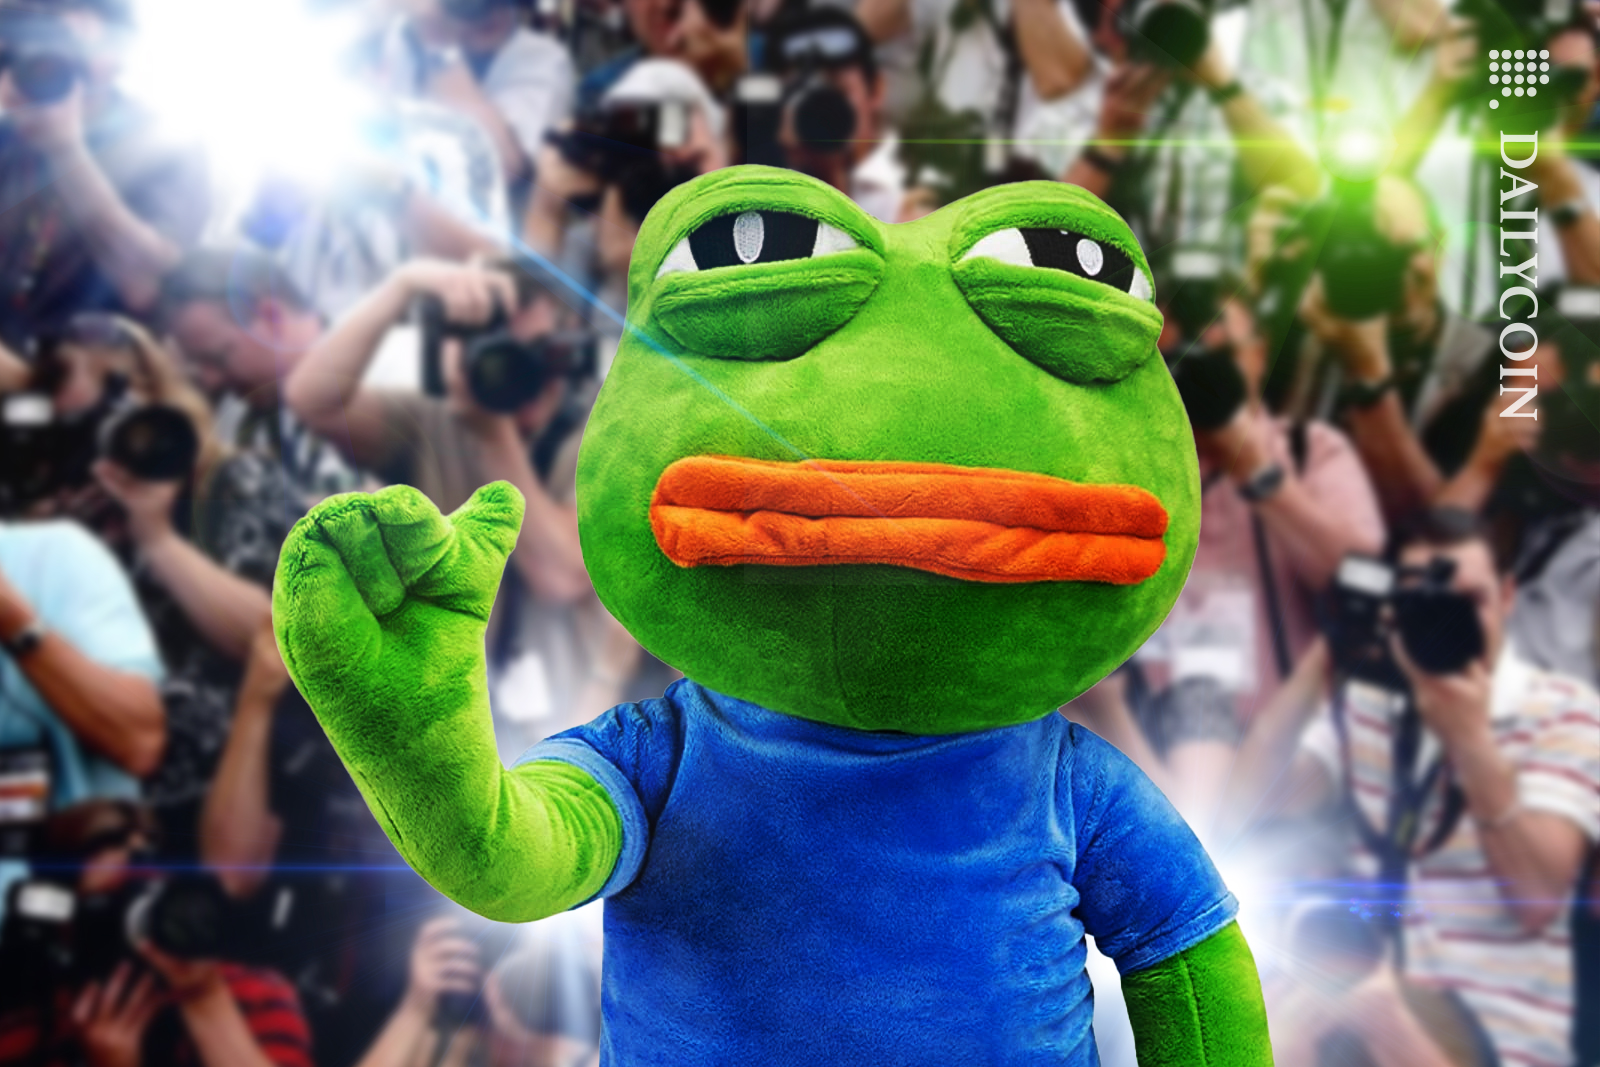 Hundreds of paparazzi taking pictures of PEPE